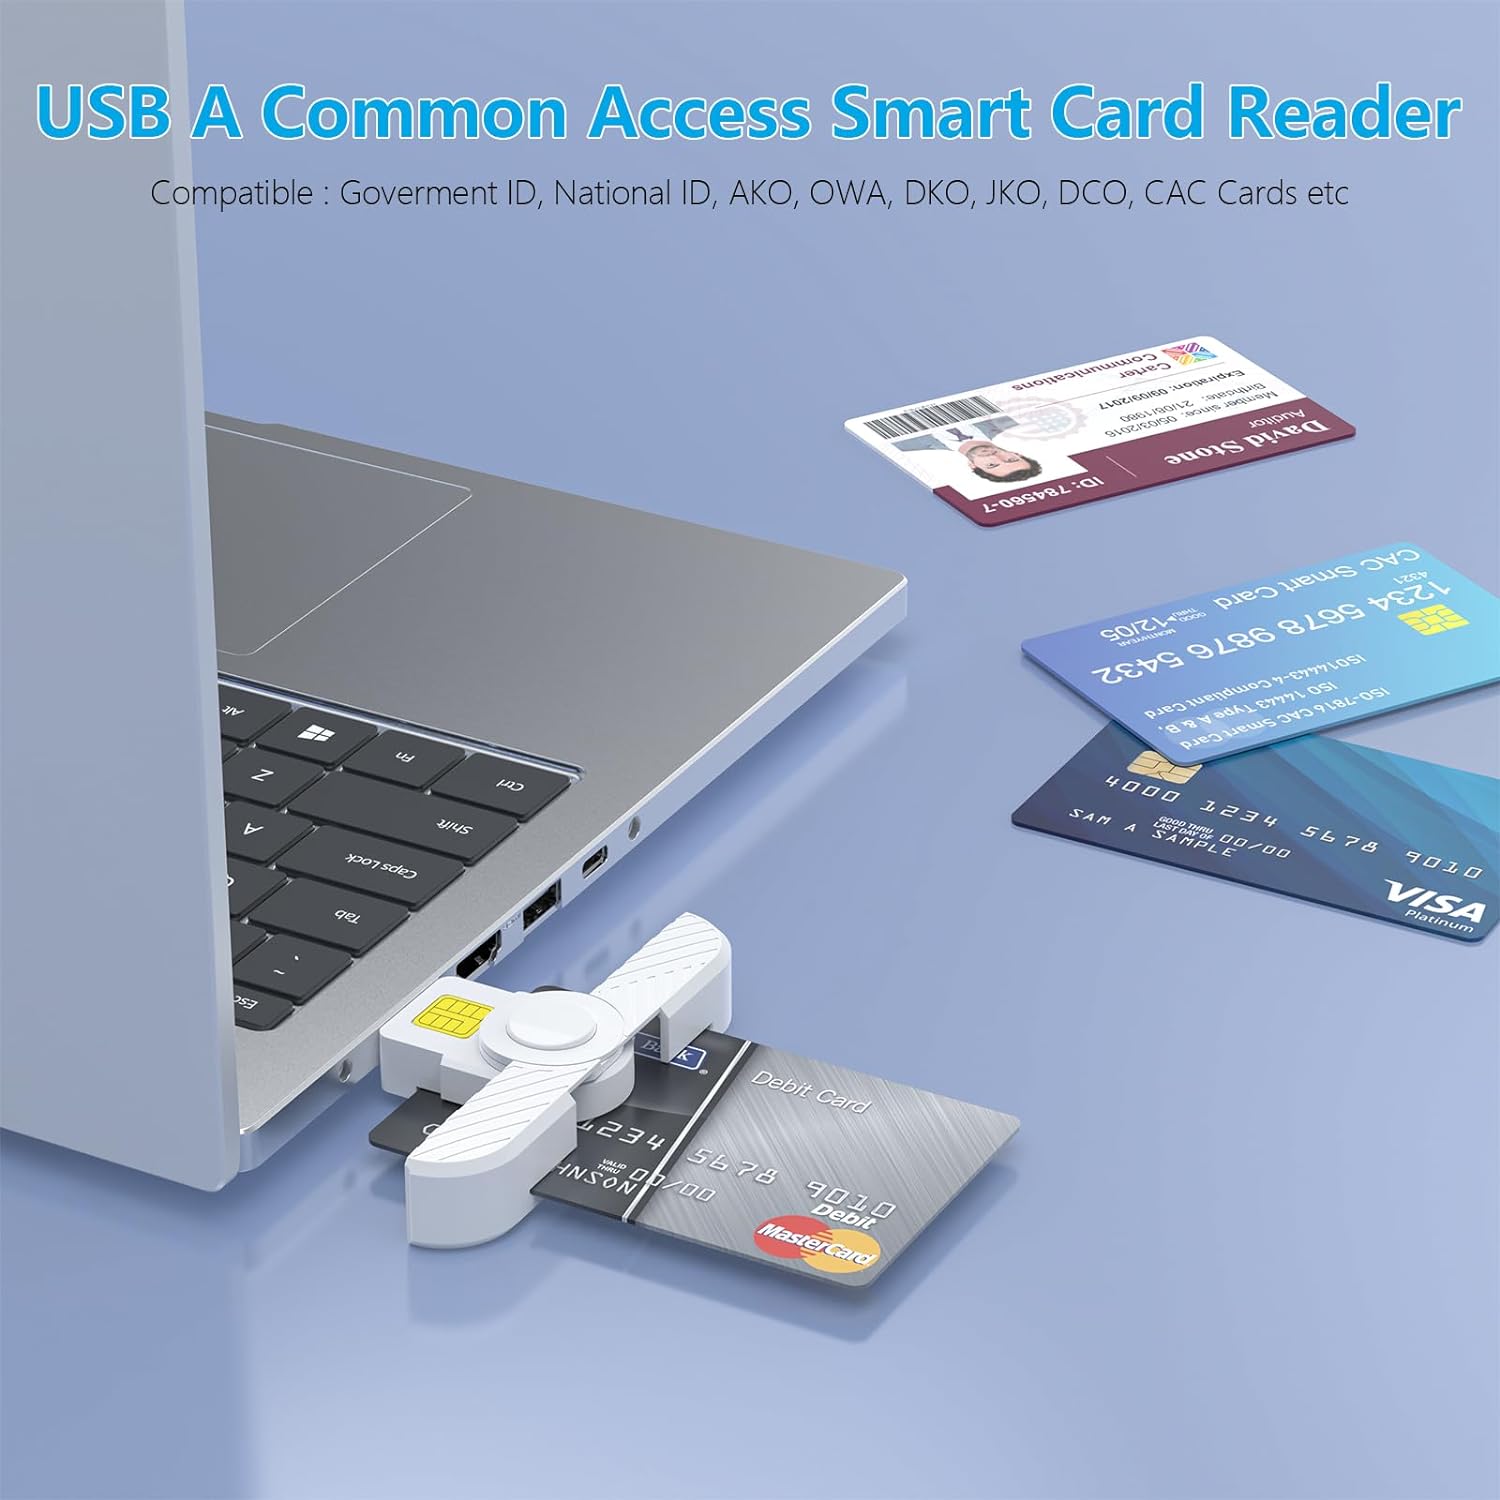 DOD Military USB Common Access CAC Smart Card Reader, ID CAC Card Reader, Smart Card Reader Compatible with Windows, Mac OS and Linux, USB A Card Reader for CAC Cards, Government ID, National ID, etc